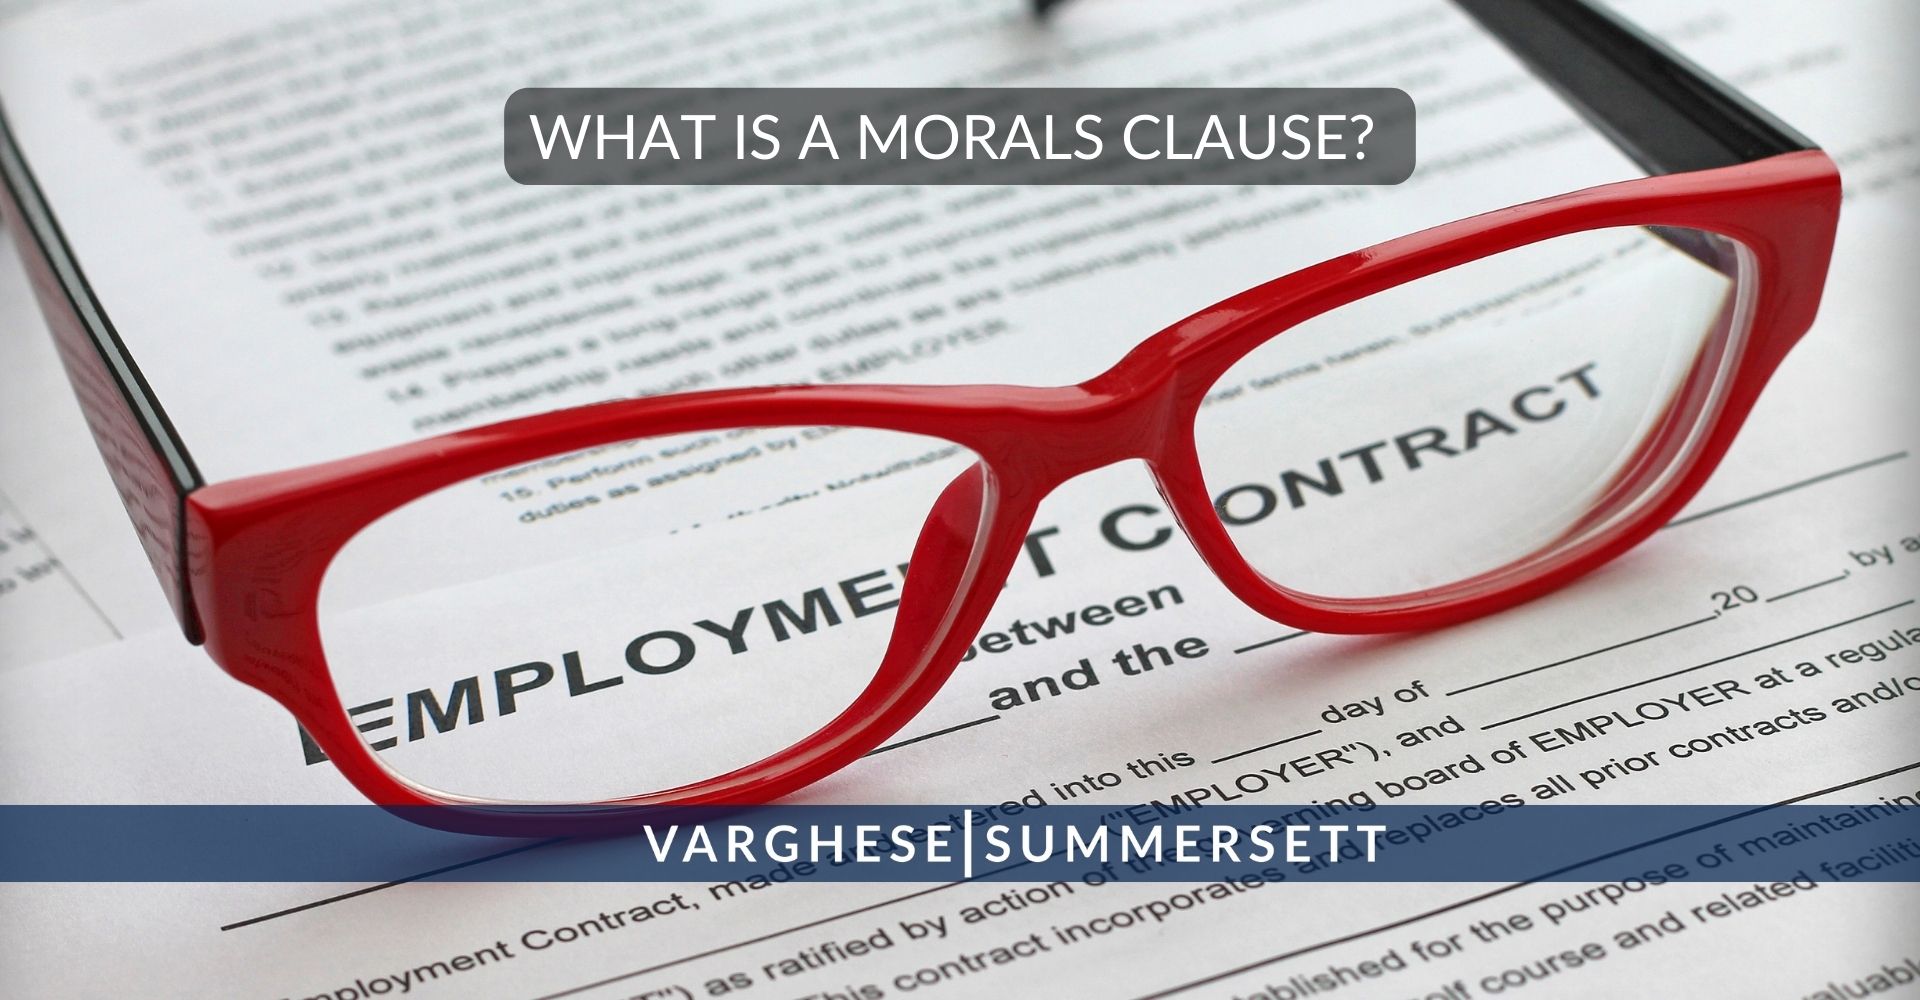 What is a morals clause